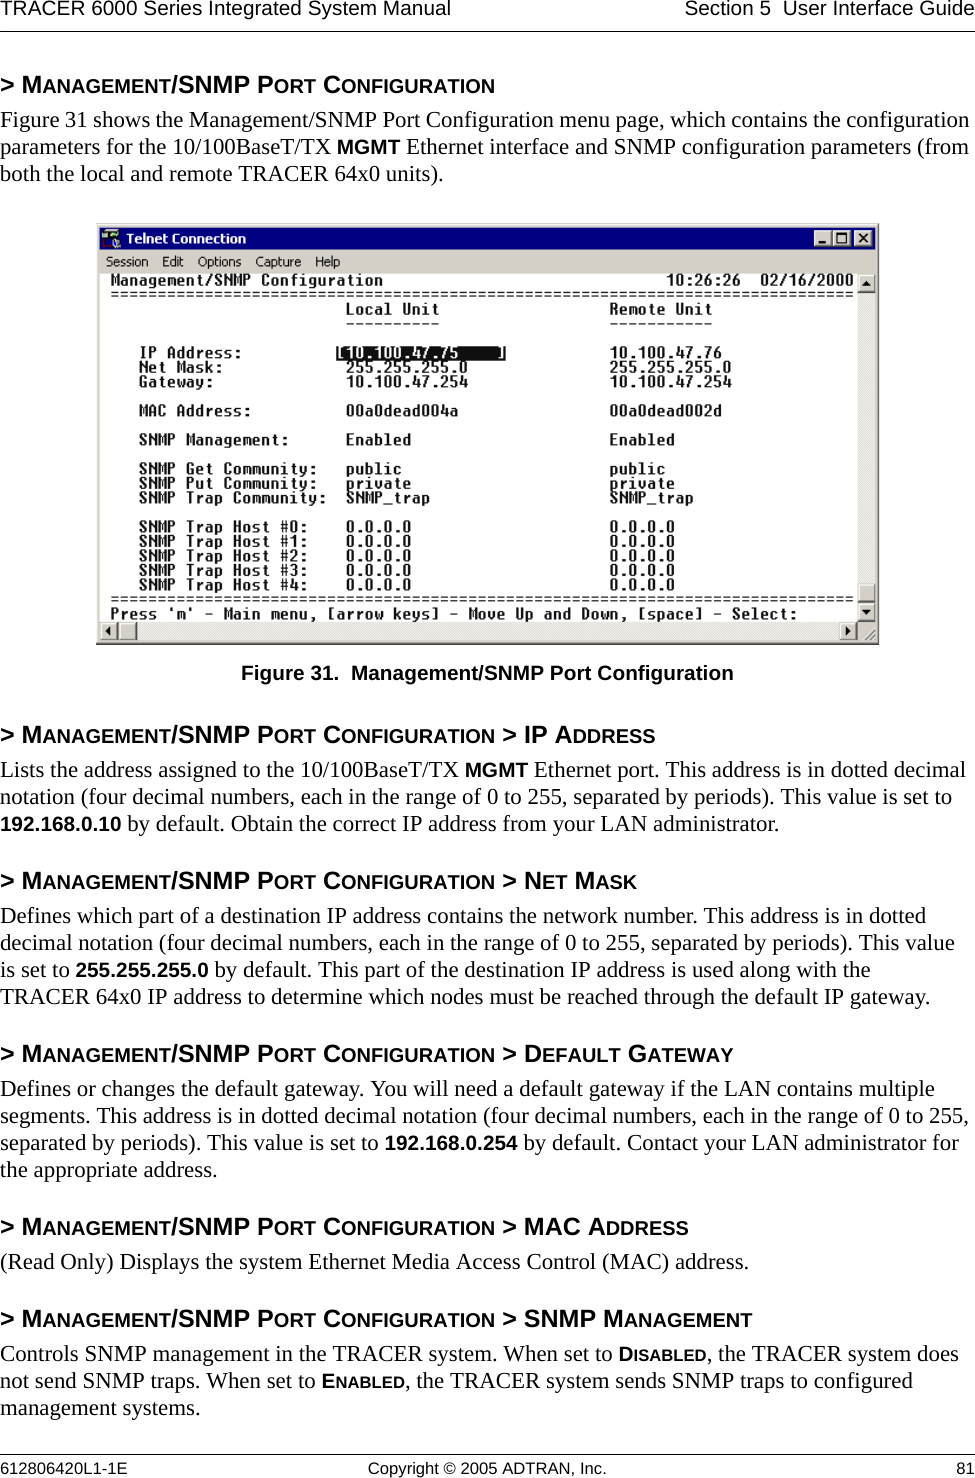 TRACER 6000 Series Integrated System Manual Section 5  User Interface Guide612806420L1-1E Copyright © 2005 ADTRAN, Inc. 81&gt; MANAGEMENT/SNMP PORT CONFIGURATIONFigure 31 shows the Management/SNMP Port Configuration menu page, which contains the configuration parameters for the 10/100BaseT/TX MGMT Ethernet interface and SNMP configuration parameters (from both the local and remote TRACER 64x0 units). Figure 31.  Management/SNMP Port Configuration&gt; MANAGEMENT/SNMP PORT CONFIGURATION &gt; IP ADDRESSLists the address assigned to the 10/100BaseT/TX MGMT Ethernet port. This address is in dotted decimal notation (four decimal numbers, each in the range of 0 to 255, separated by periods). This value is set to 192.168.0.10 by default. Obtain the correct IP address from your LAN administrator.&gt; MANAGEMENT/SNMP PORT CONFIGURATION &gt; NET MASKDefines which part of a destination IP address contains the network number. This address is in dotted decimal notation (four decimal numbers, each in the range of 0 to 255, separated by periods). This value is set to 255.255.255.0 by default. This part of the destination IP address is used along with the TRACER 64x0 IP address to determine which nodes must be reached through the default IP gateway.&gt; MANAGEMENT/SNMP PORT CONFIGURATION &gt; DEFAULT GATEWAYDefines or changes the default gateway. You will need a default gateway if the LAN contains multiple segments. This address is in dotted decimal notation (four decimal numbers, each in the range of 0 to 255, separated by periods). This value is set to 192.168.0.254 by default. Contact your LAN administrator for the appropriate address.&gt; MANAGEMENT/SNMP PORT CONFIGURATION &gt; MAC ADDRESS(Read Only) Displays the system Ethernet Media Access Control (MAC) address.&gt; MANAGEMENT/SNMP PORT CONFIGURATION &gt; SNMP MANAGEMENTControls SNMP management in the TRACER system. When set to DISABLED, the TRACER system does not send SNMP traps. When set to ENABLED, the TRACER system sends SNMP traps to configured management systems.